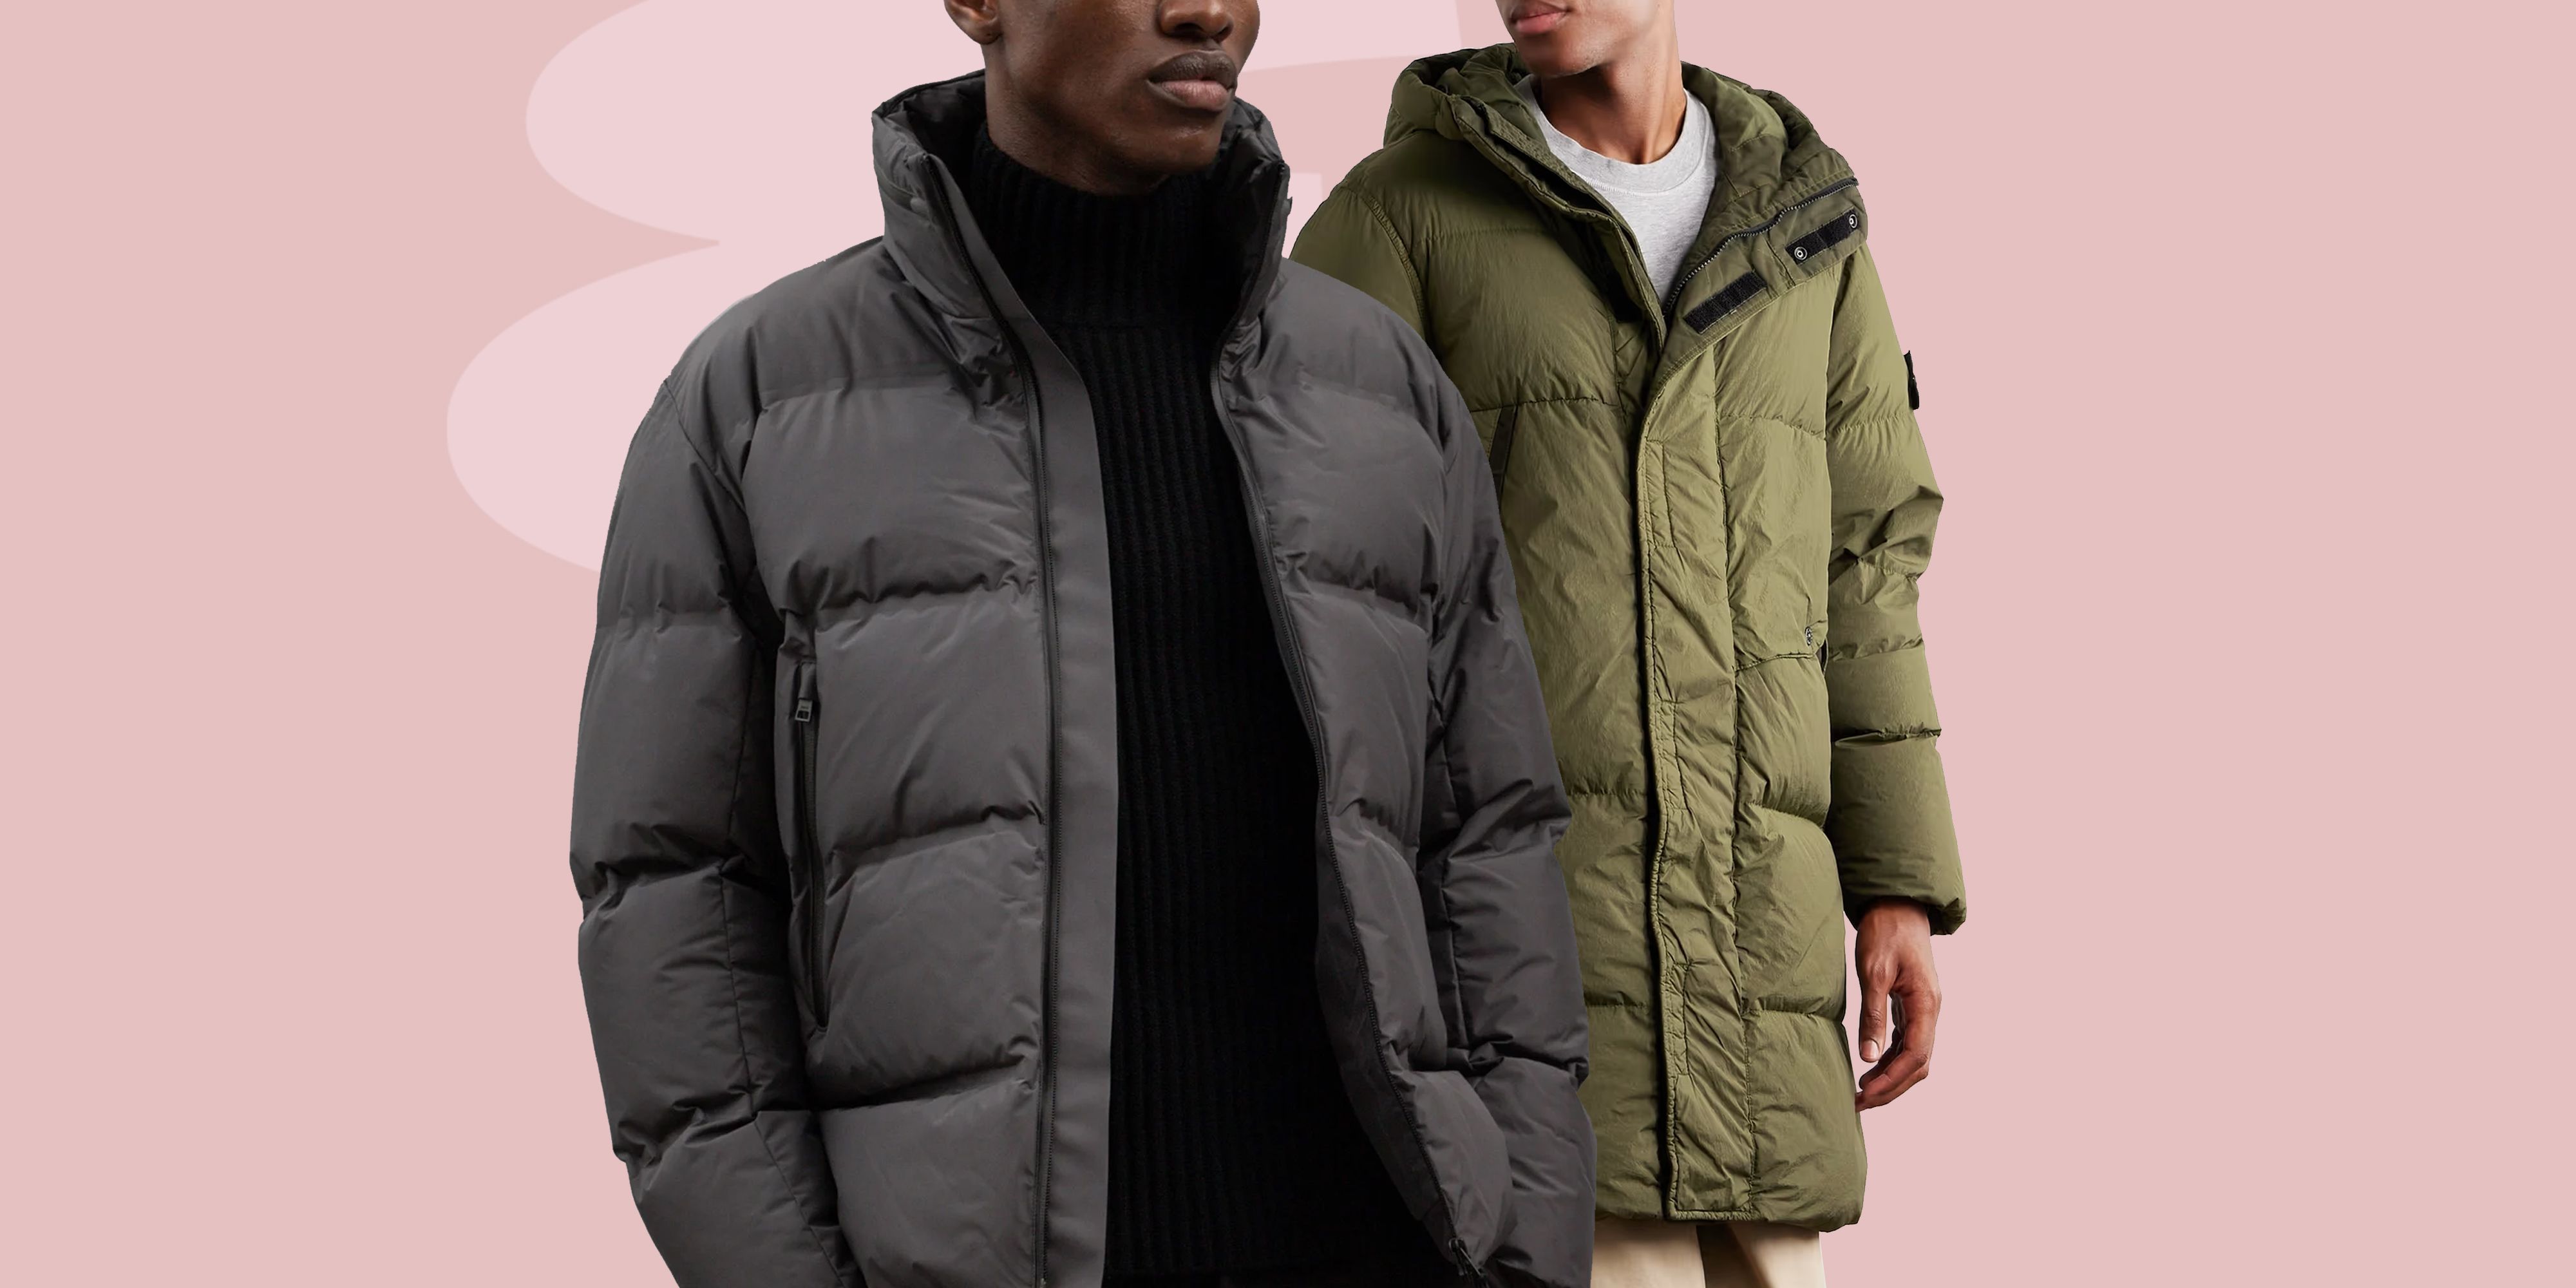 Uniqlo ULTRA LIGHT DOWN JACKET Review (2021 Edition) - A Budget